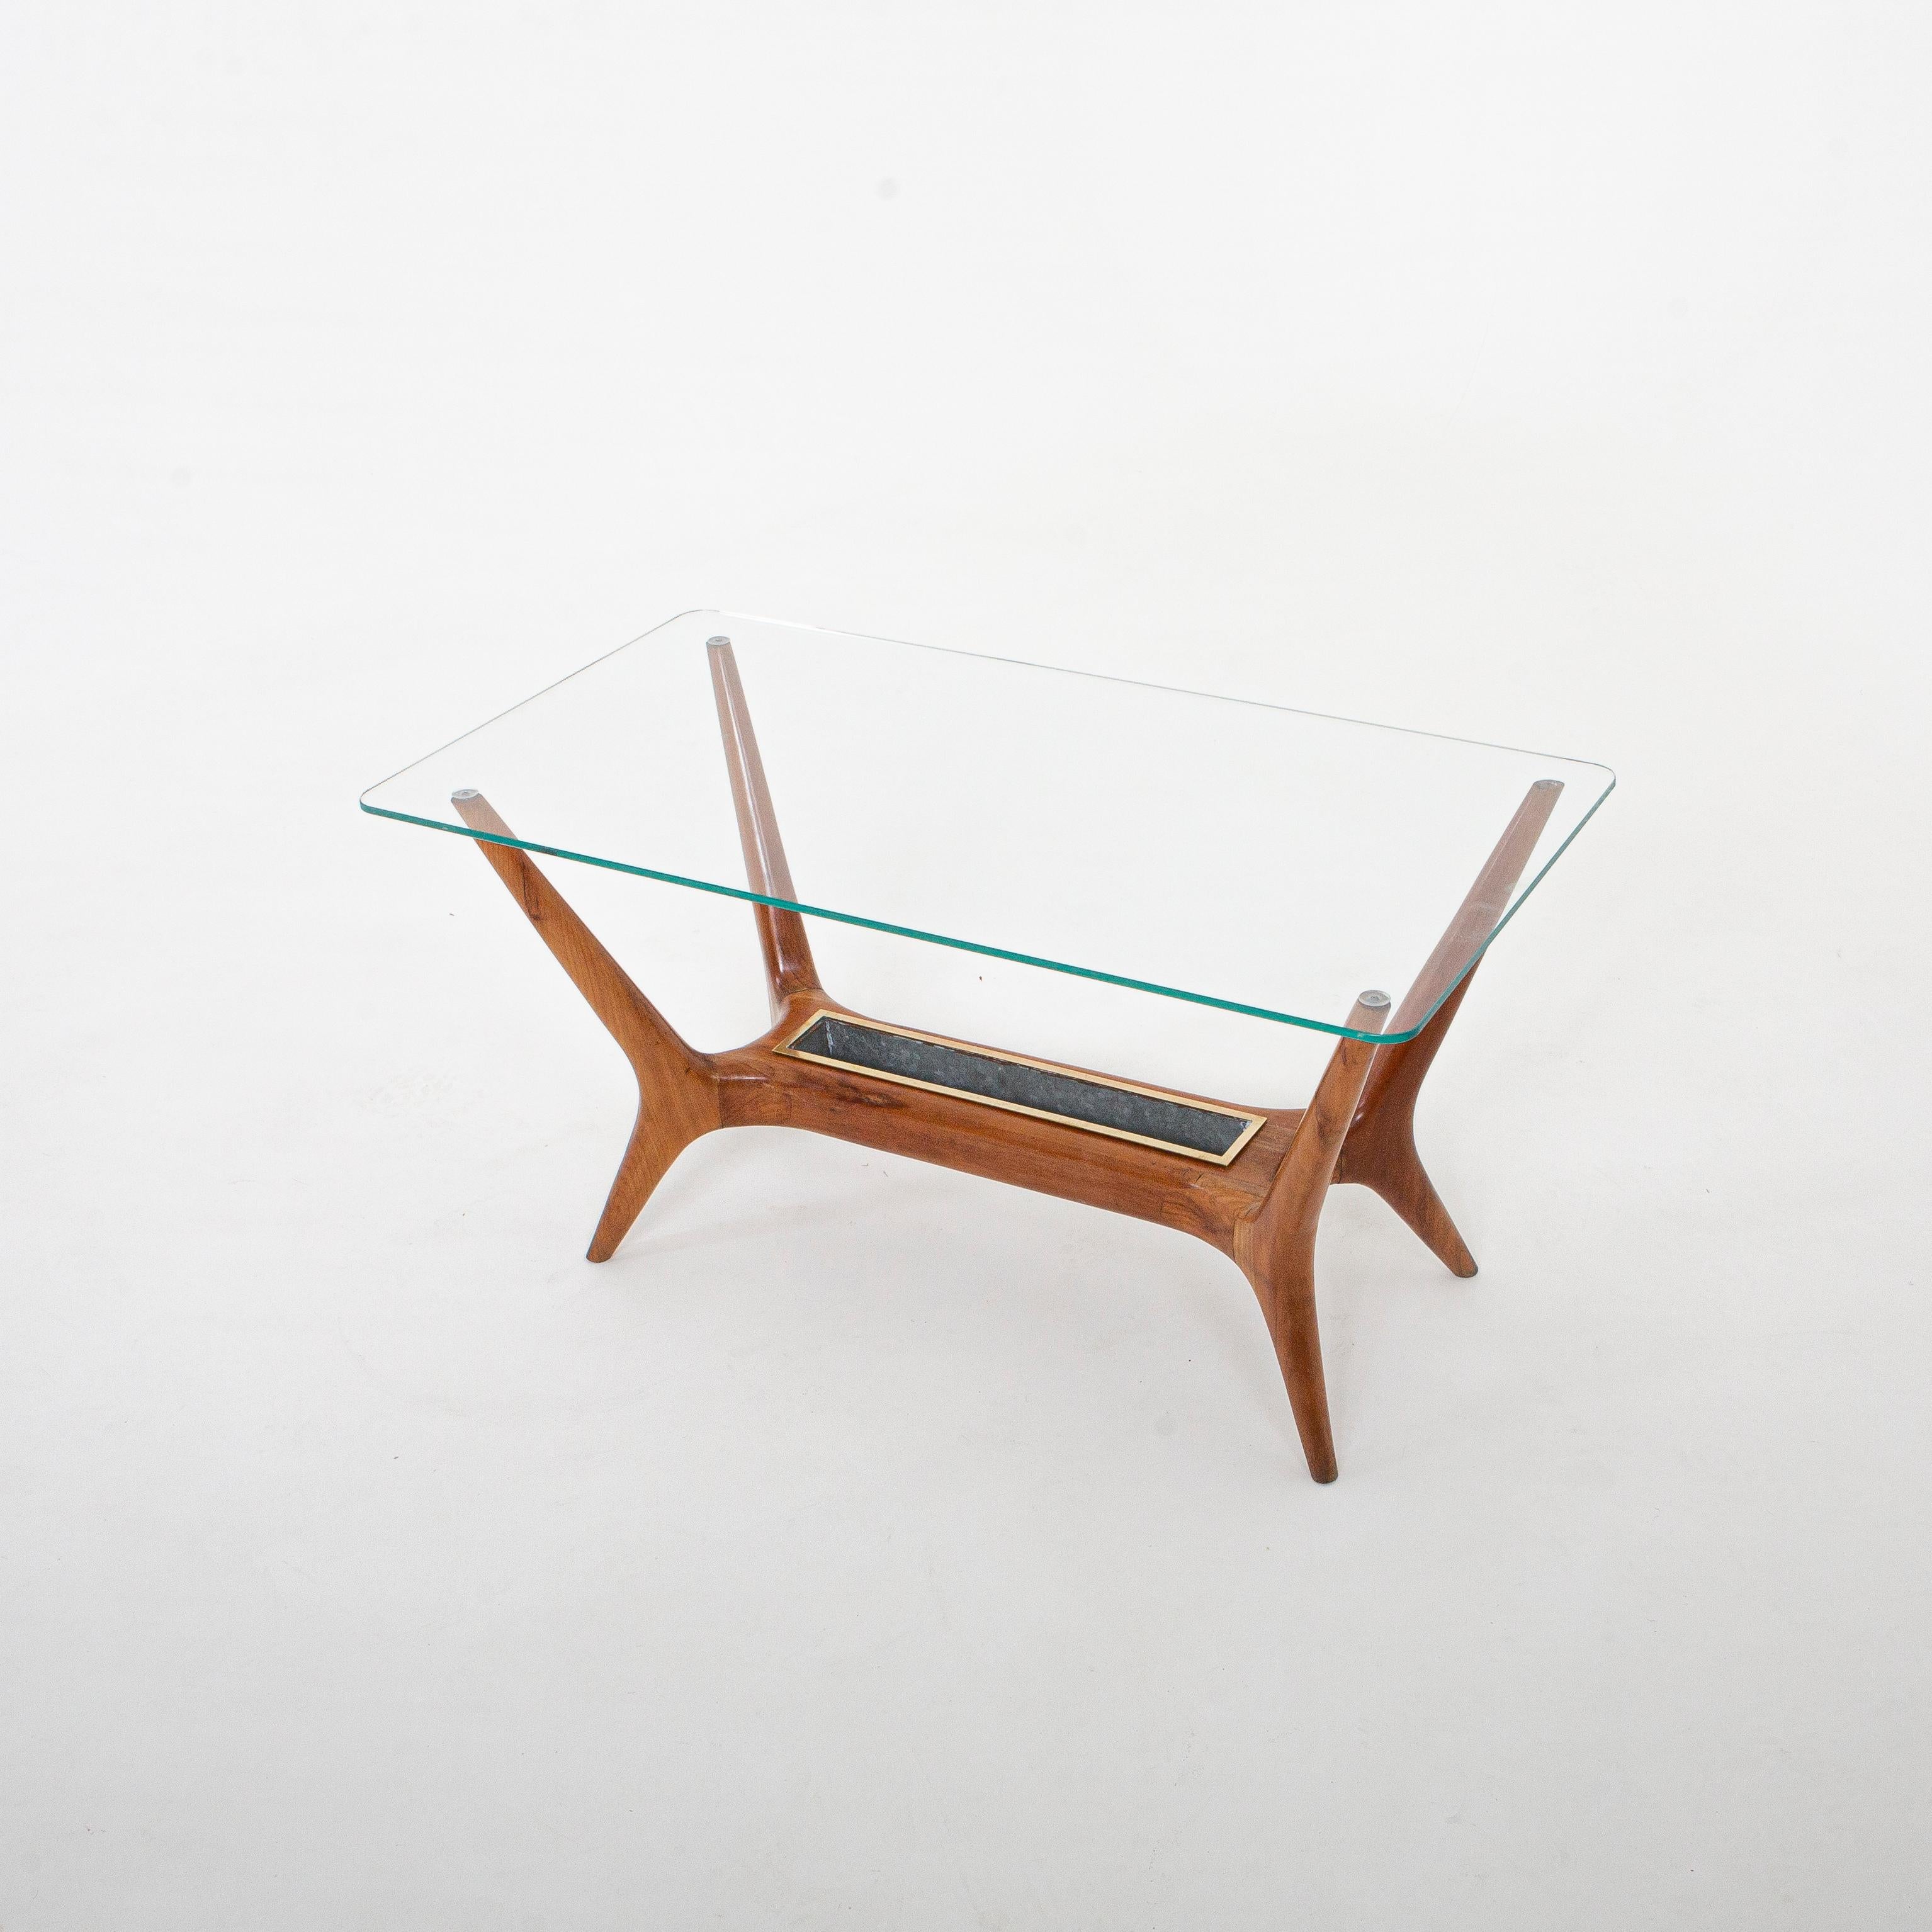 Italian Modernist Cocktail Table Attributed to Gio Ponti For Sale 1